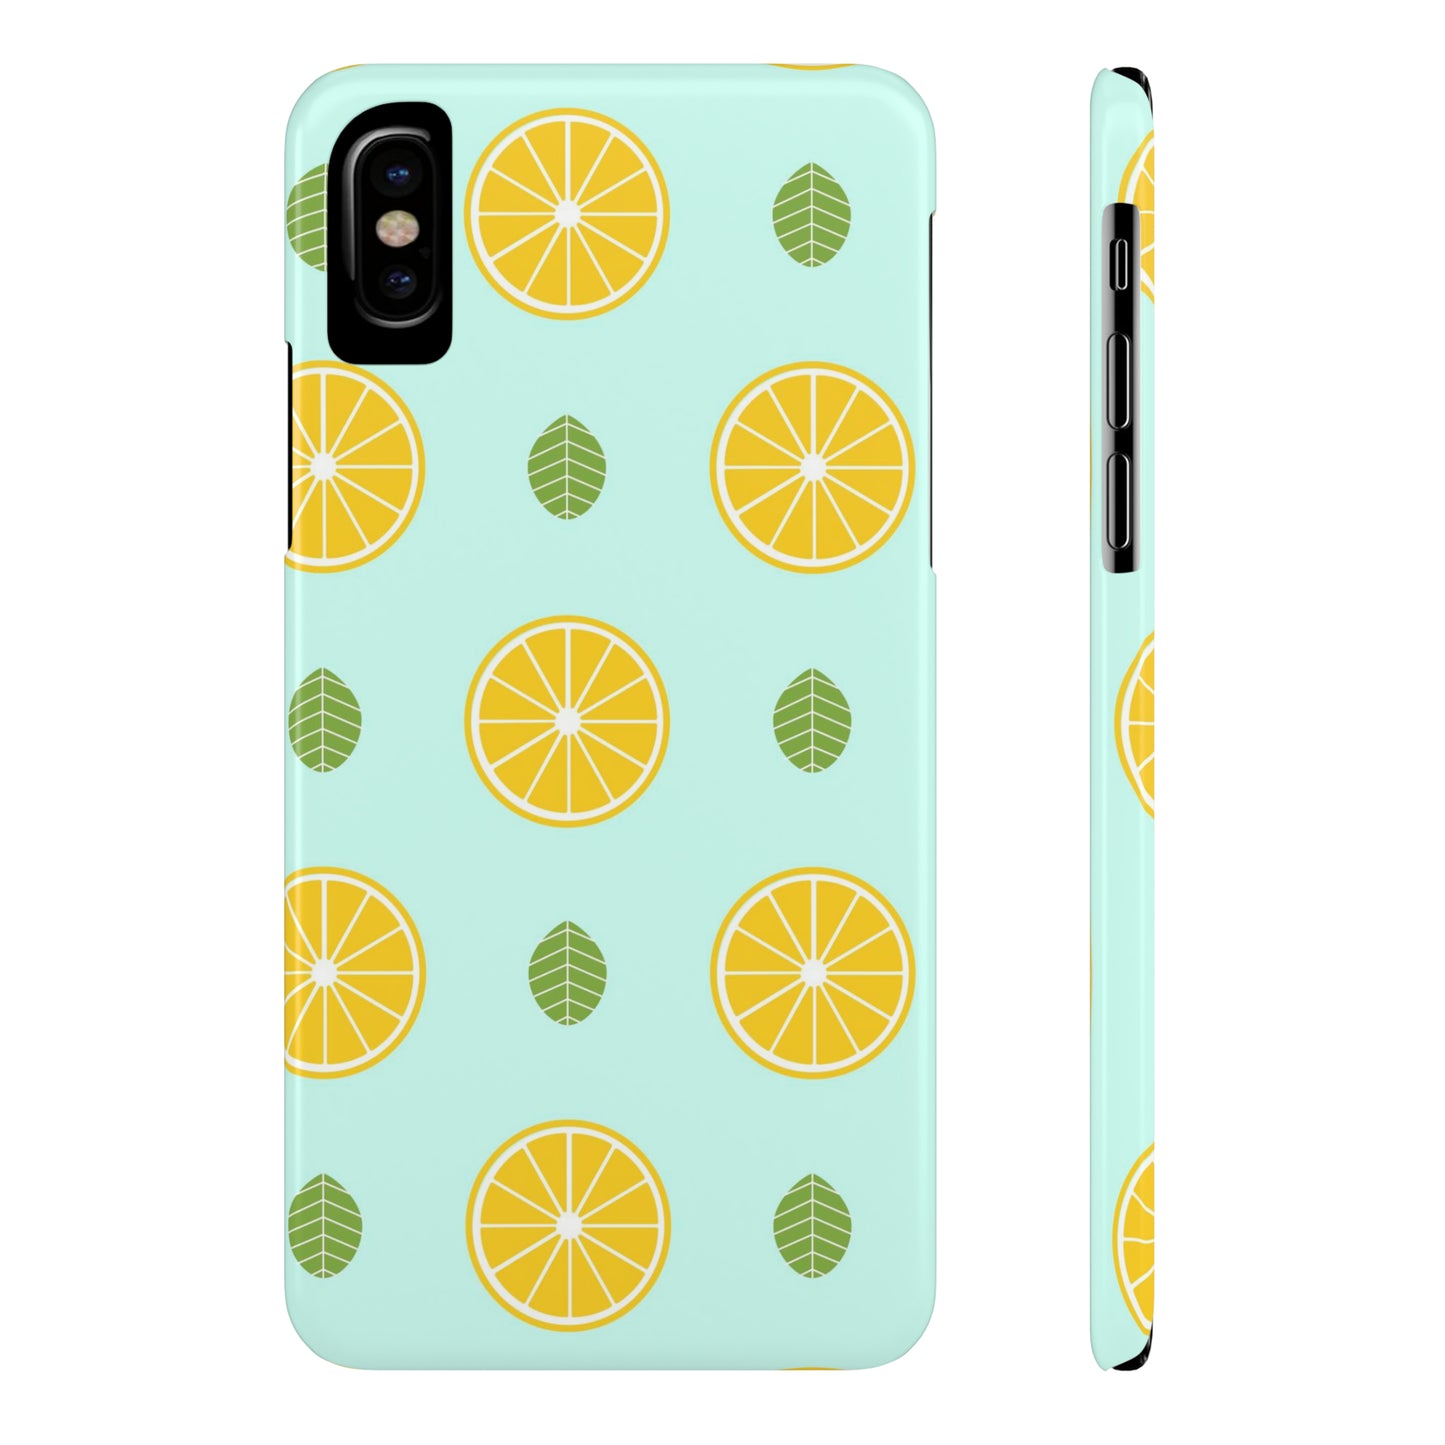 Lime iPhone case